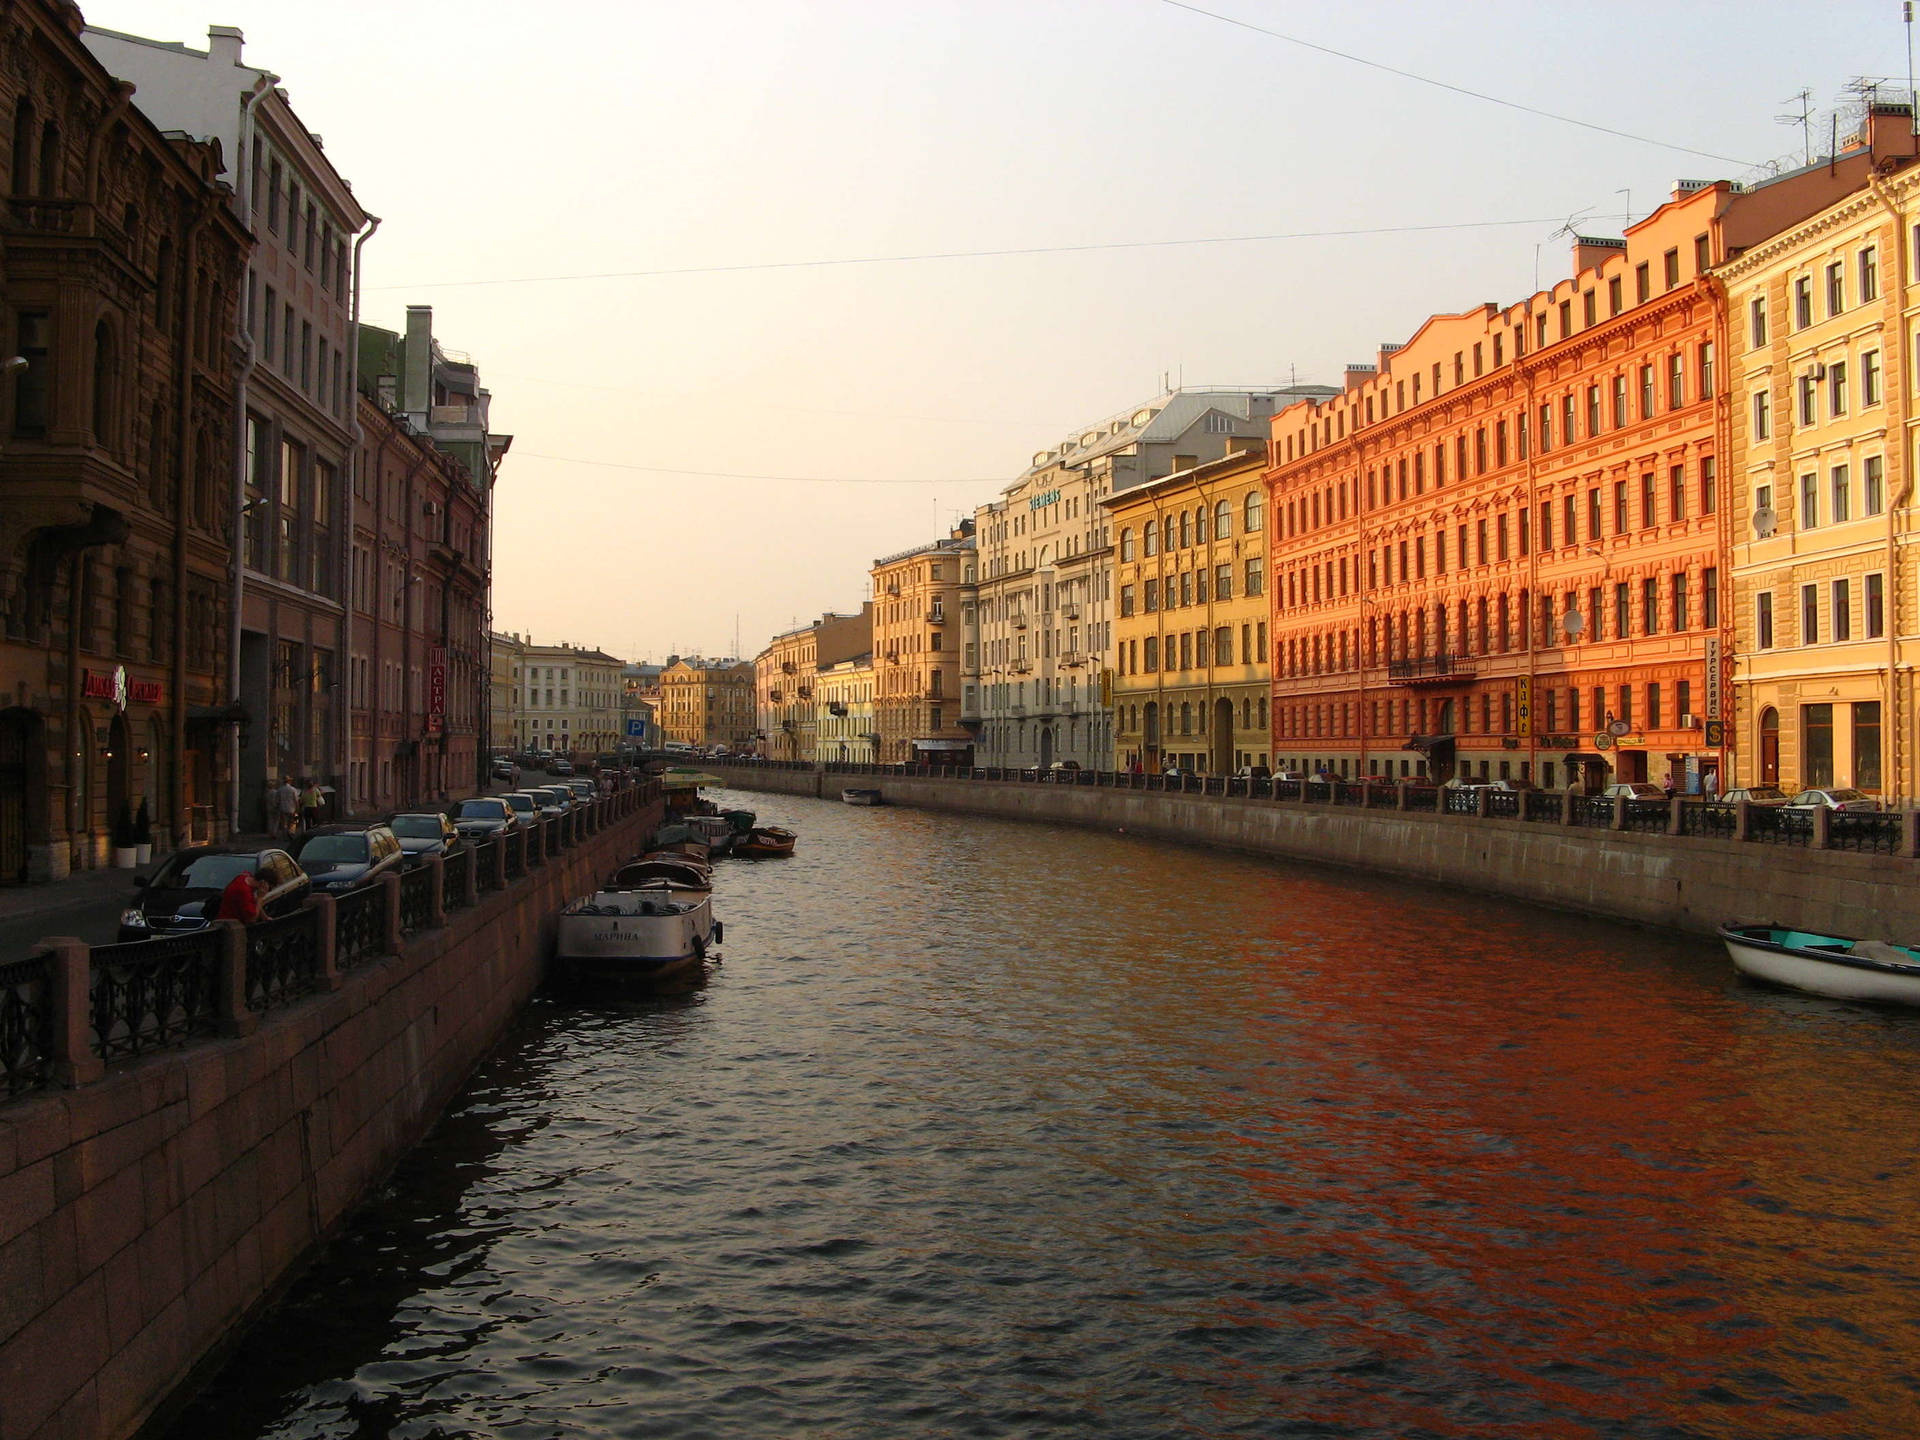 A Moyka River In St. Petersburg